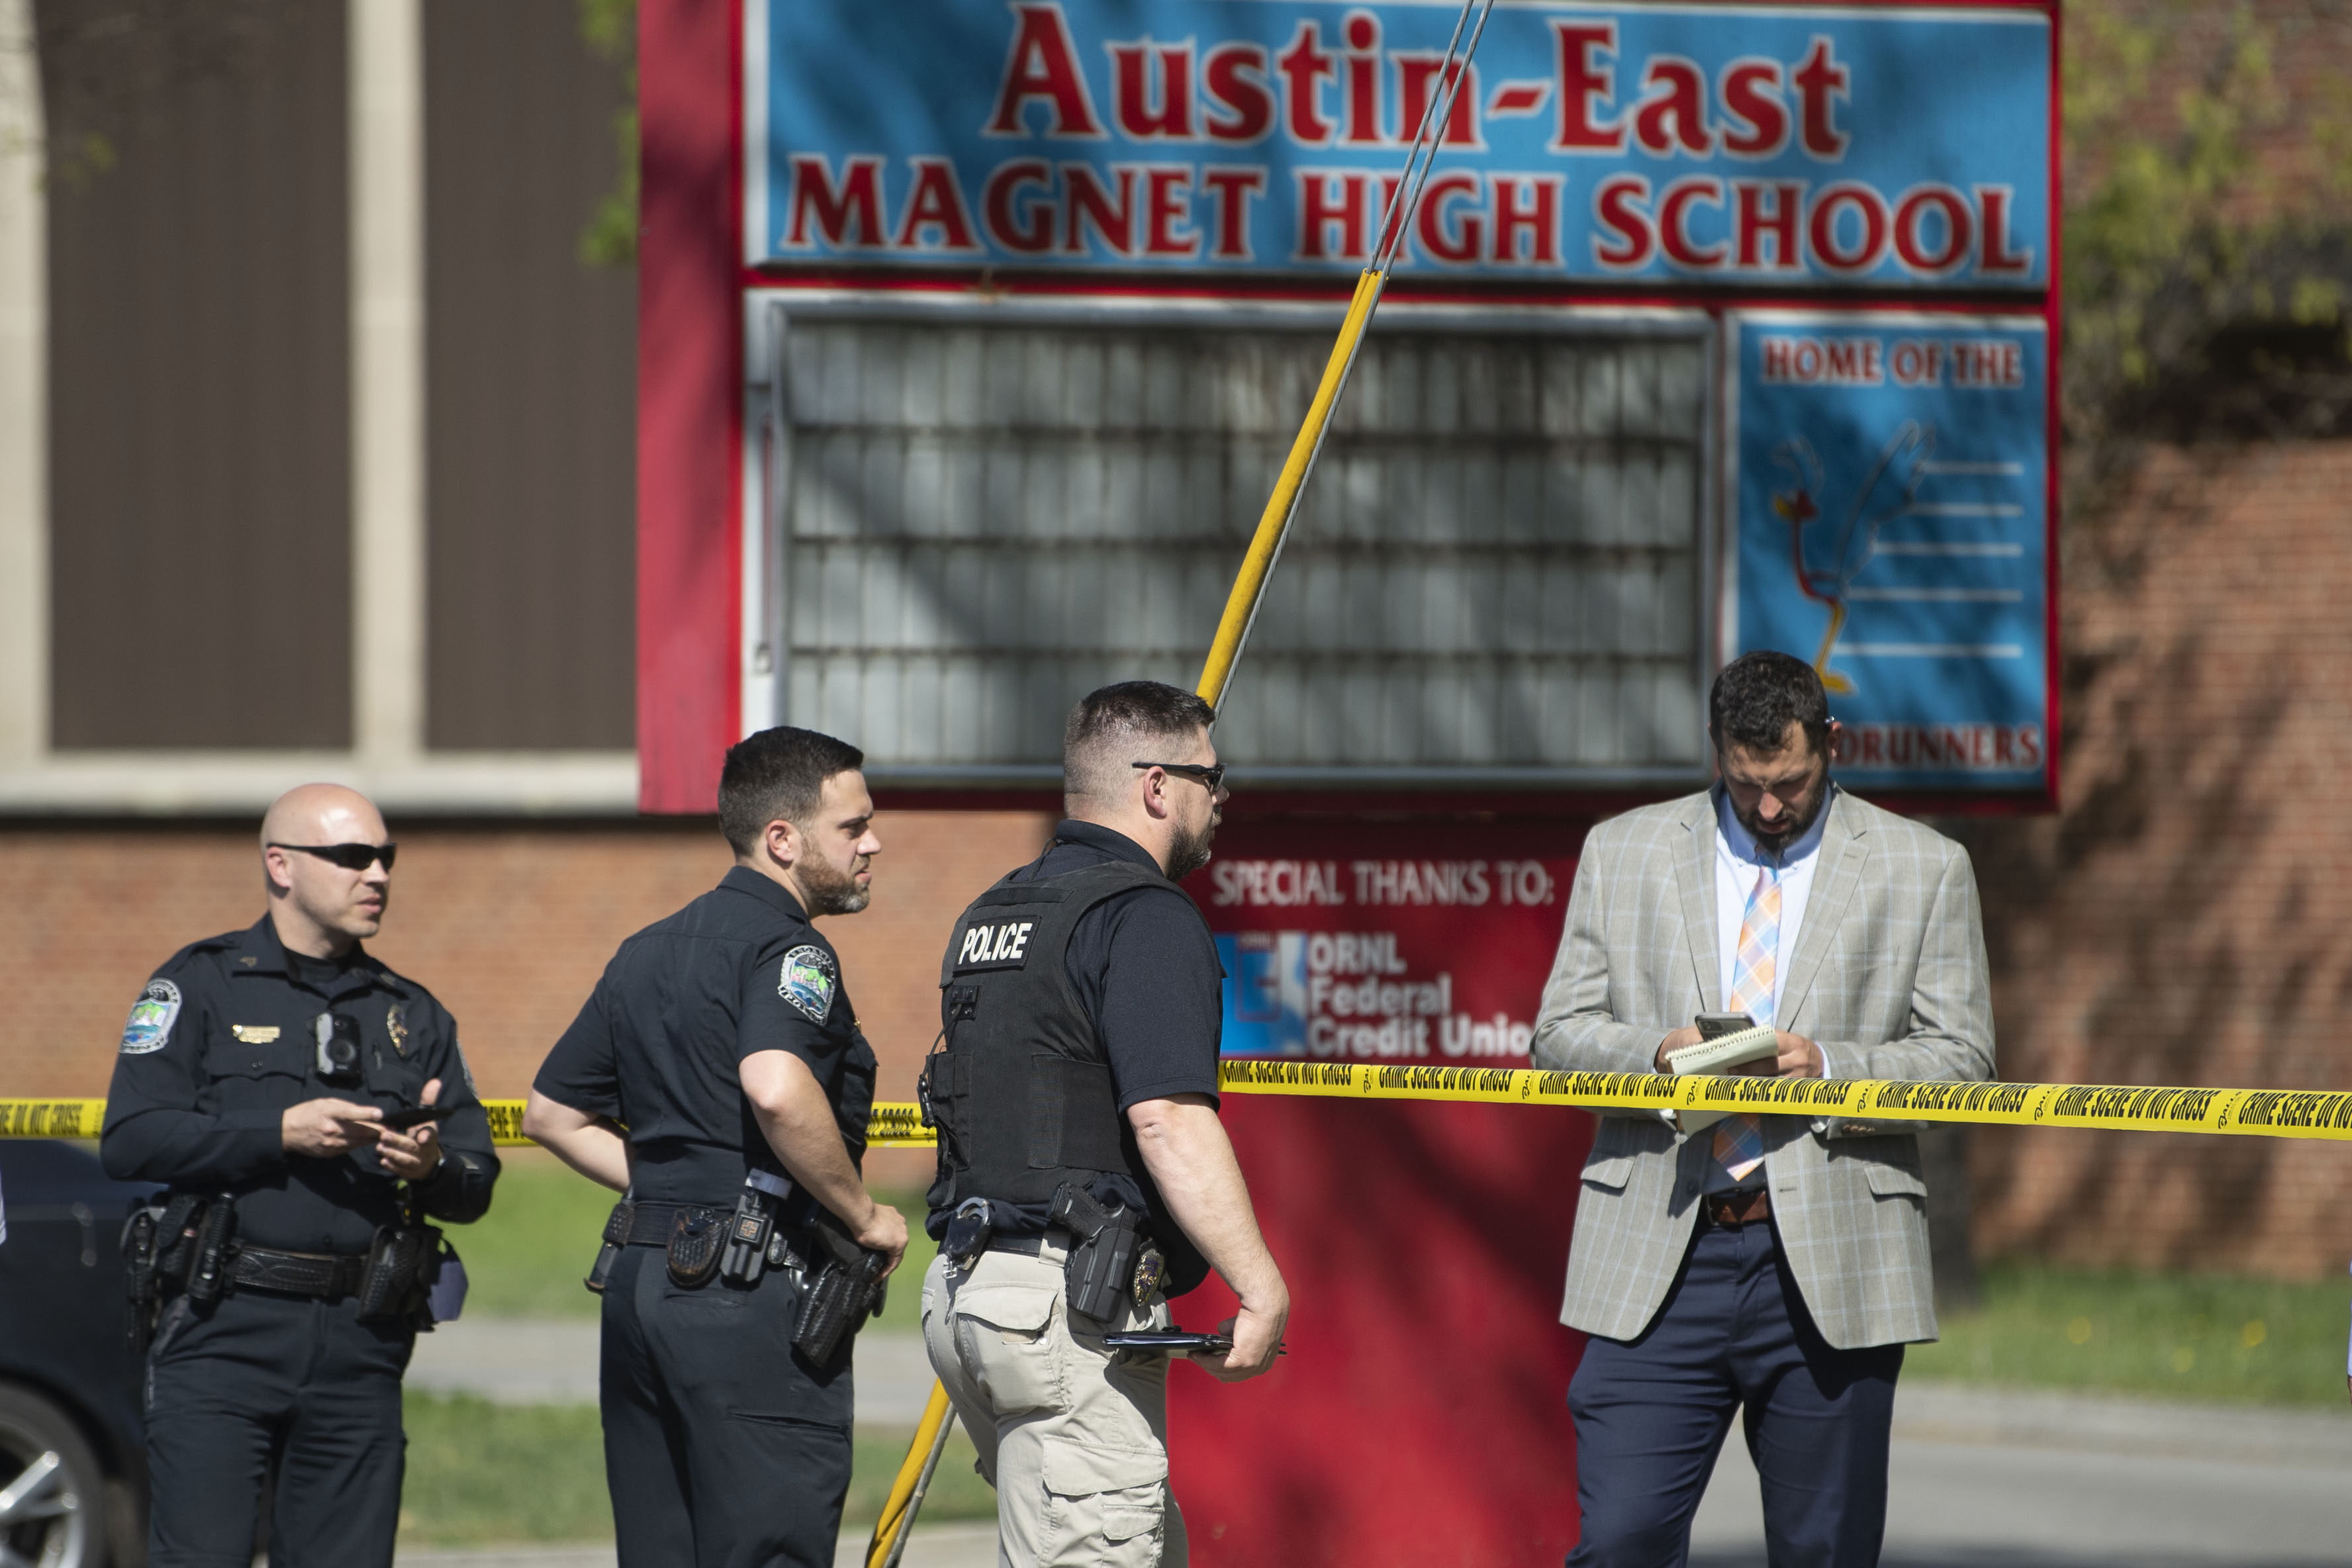 Law enforcement officers respond to the shooting at Austin-East Magnet High School in Knoxville, Tennessee. Photo: AP